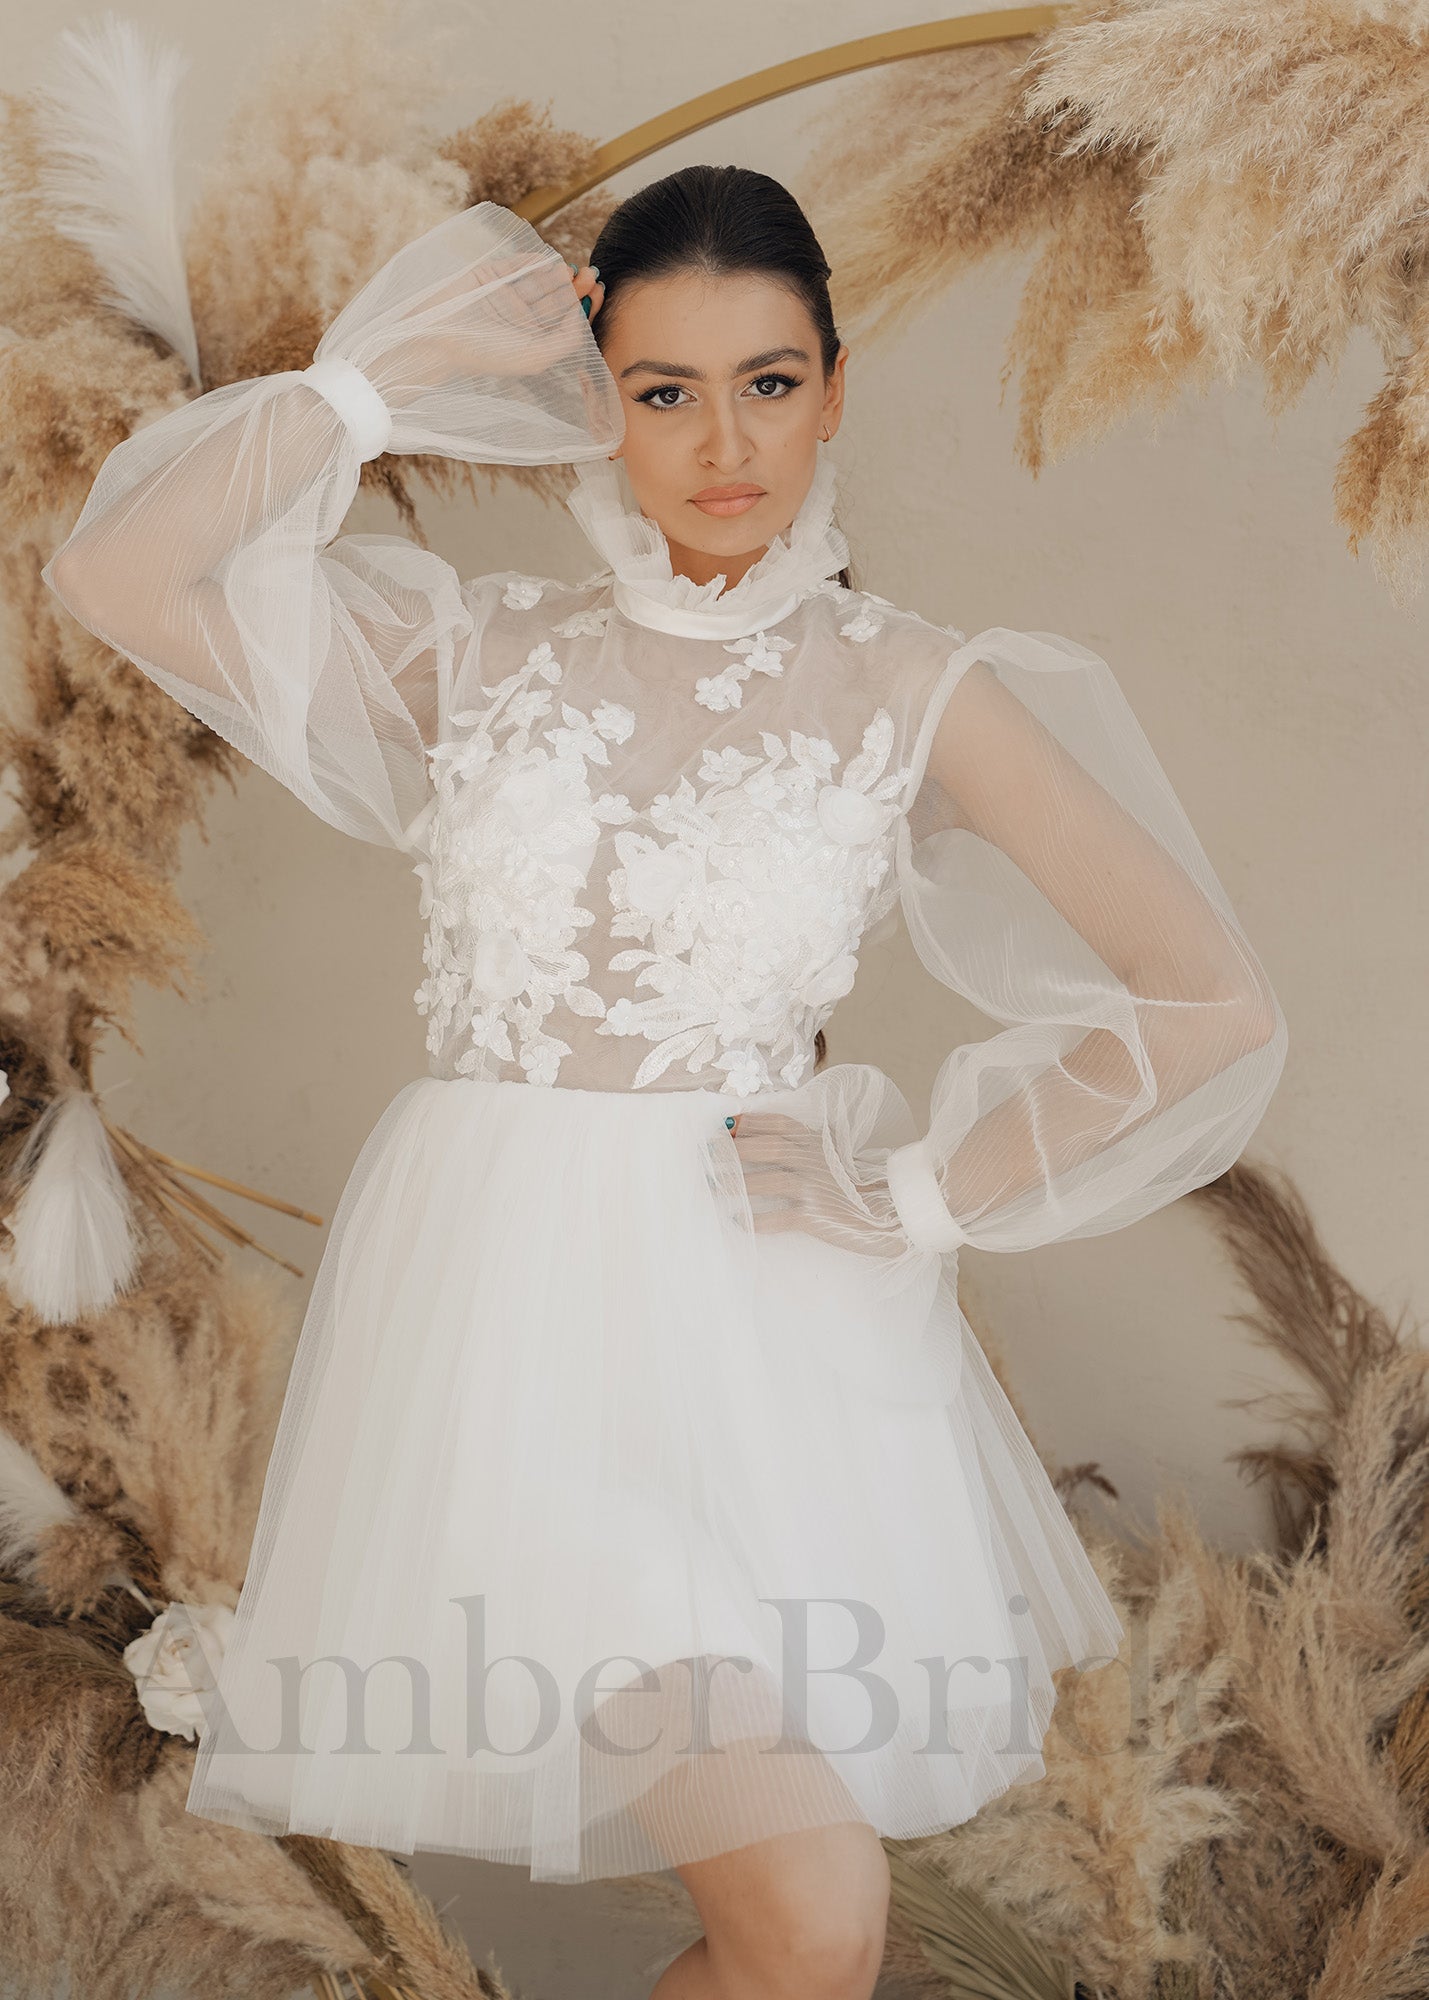 Floral Mini Tulle Dress with Long Puffy Sleeves and Backless Design